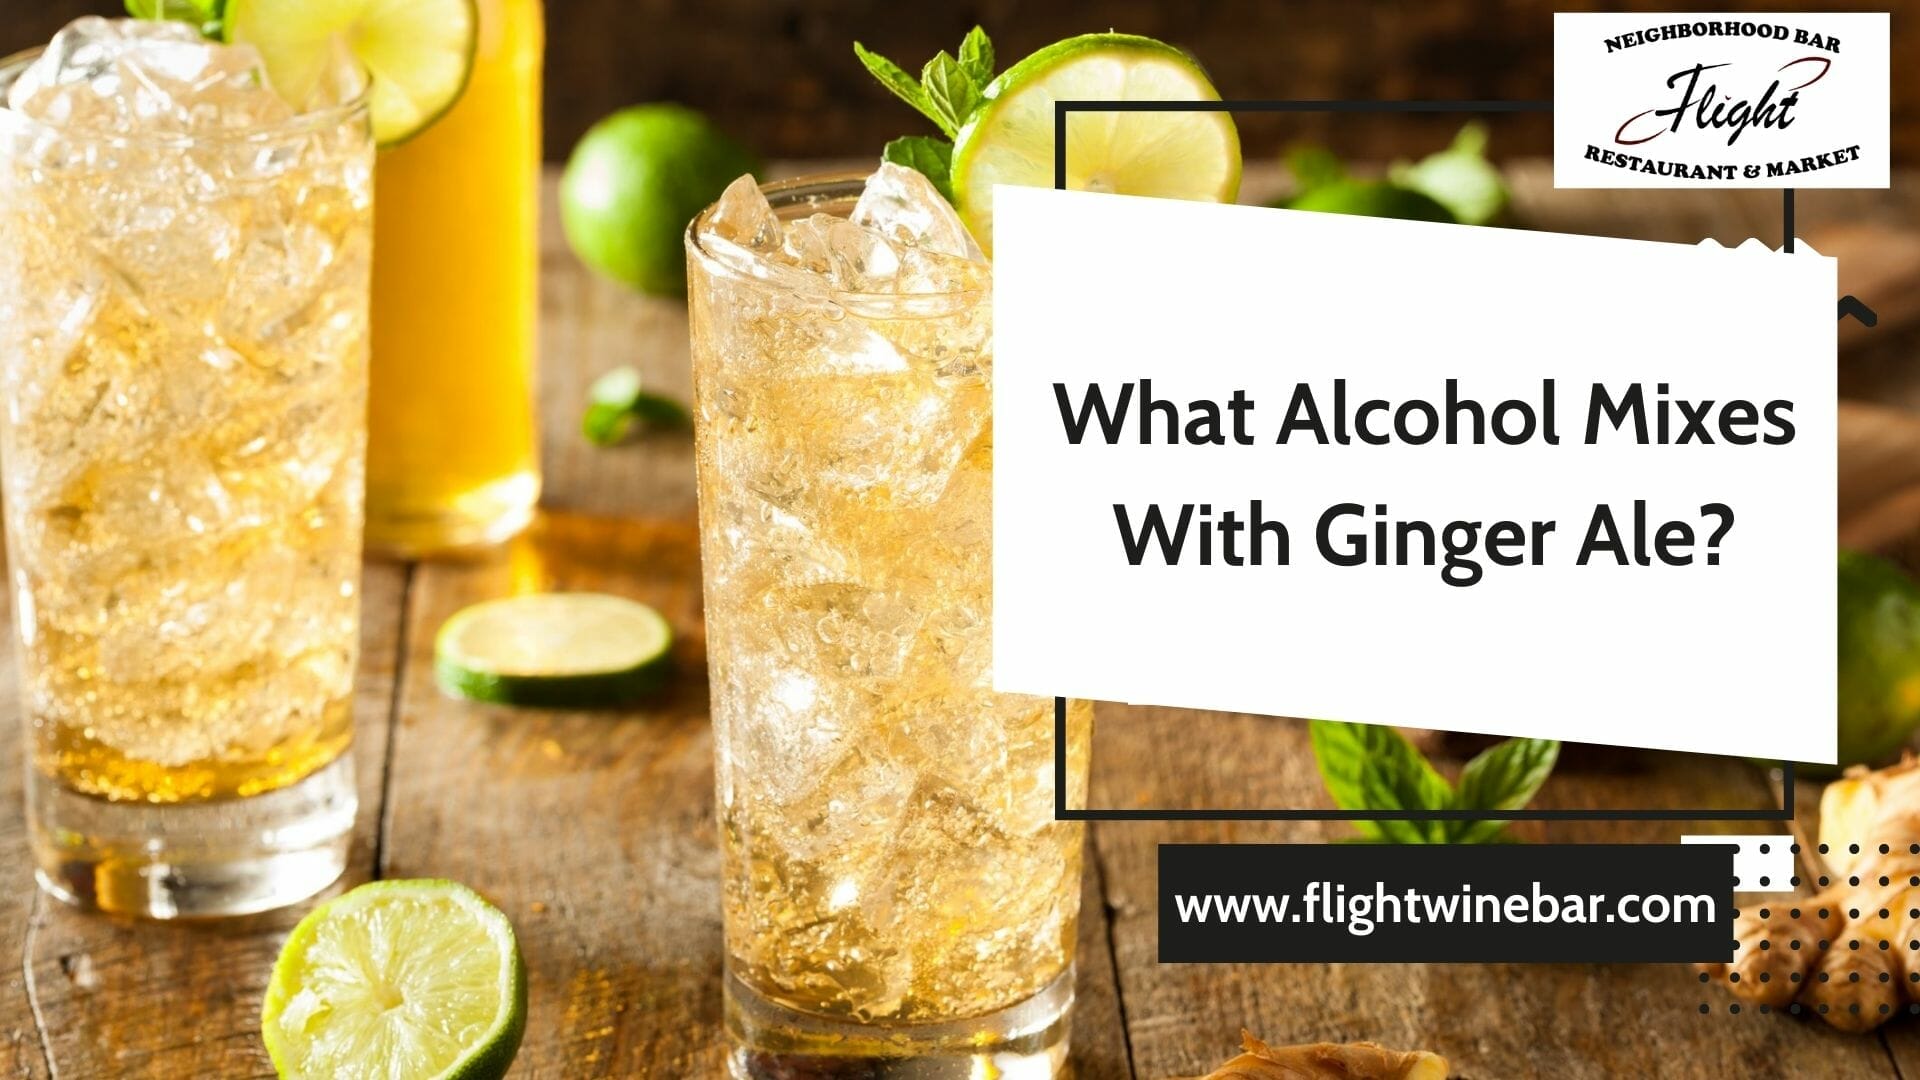 What Alcohol Mixes With Ginger Ale